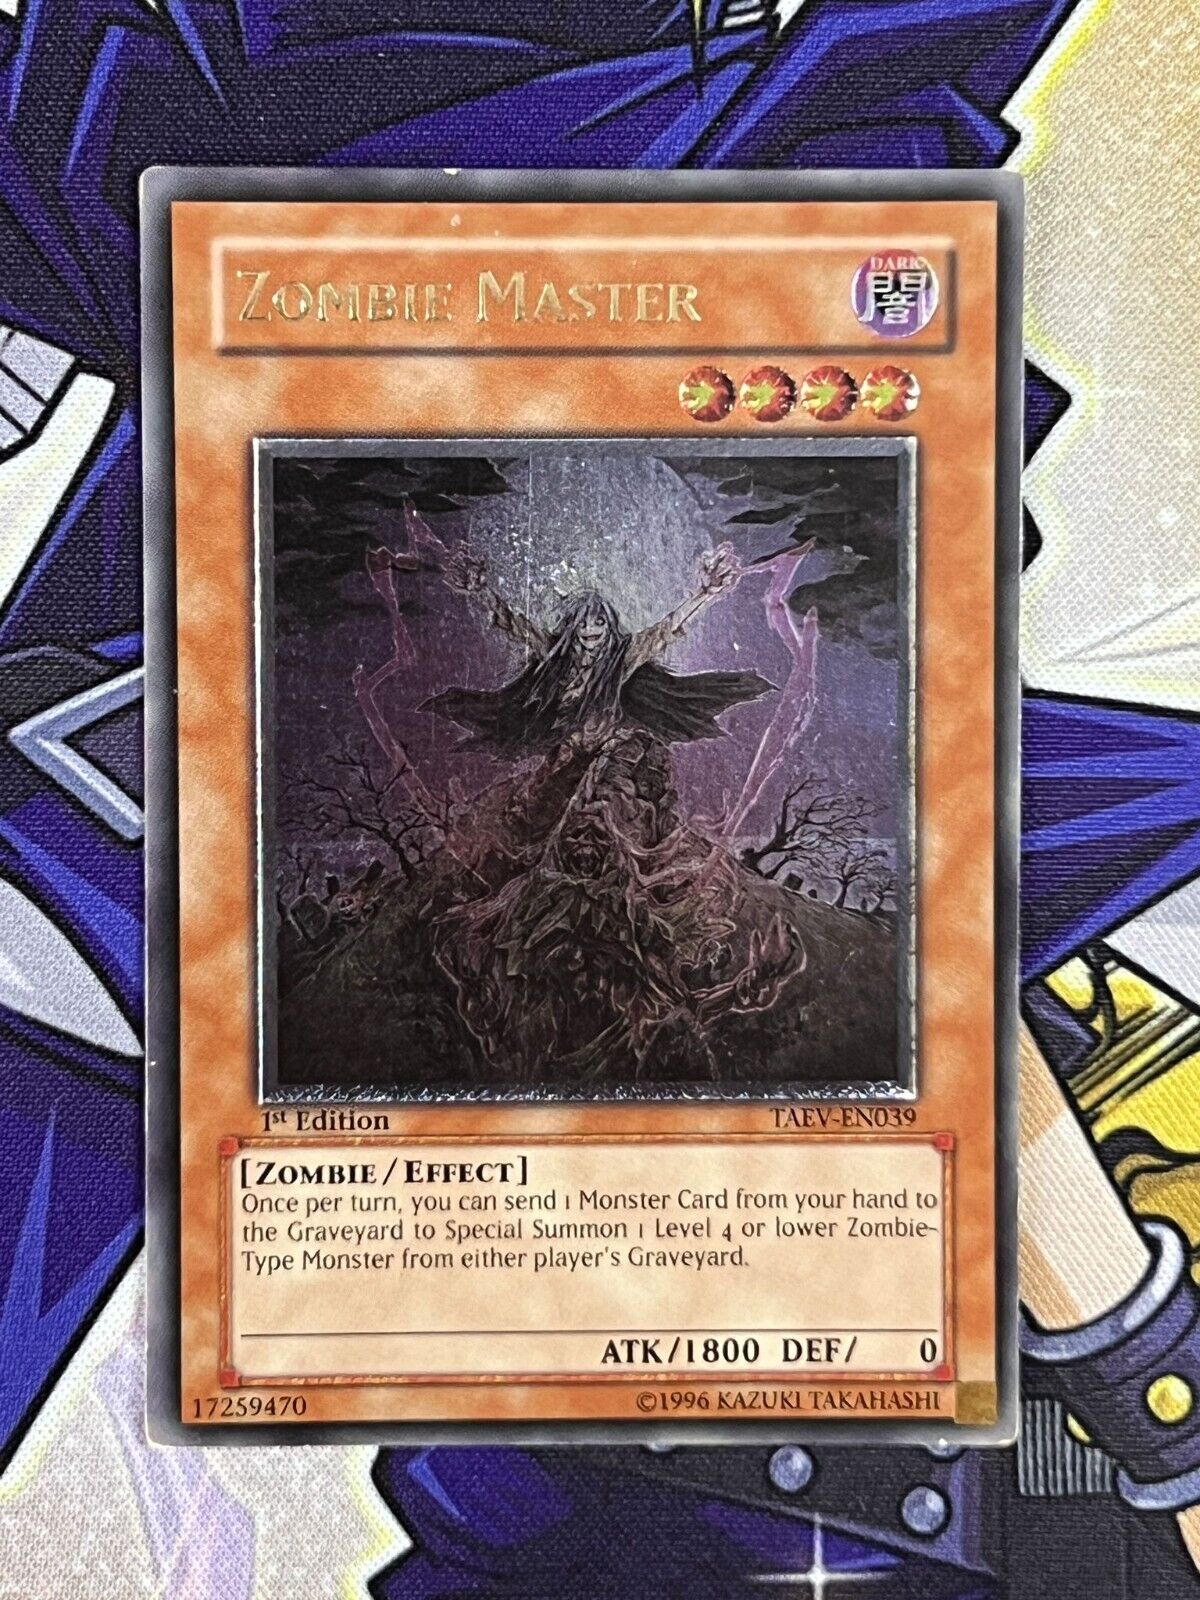 TAEV-EN039 Zombie Master Ultimate Rare 1st Edition MP Yugioh Card